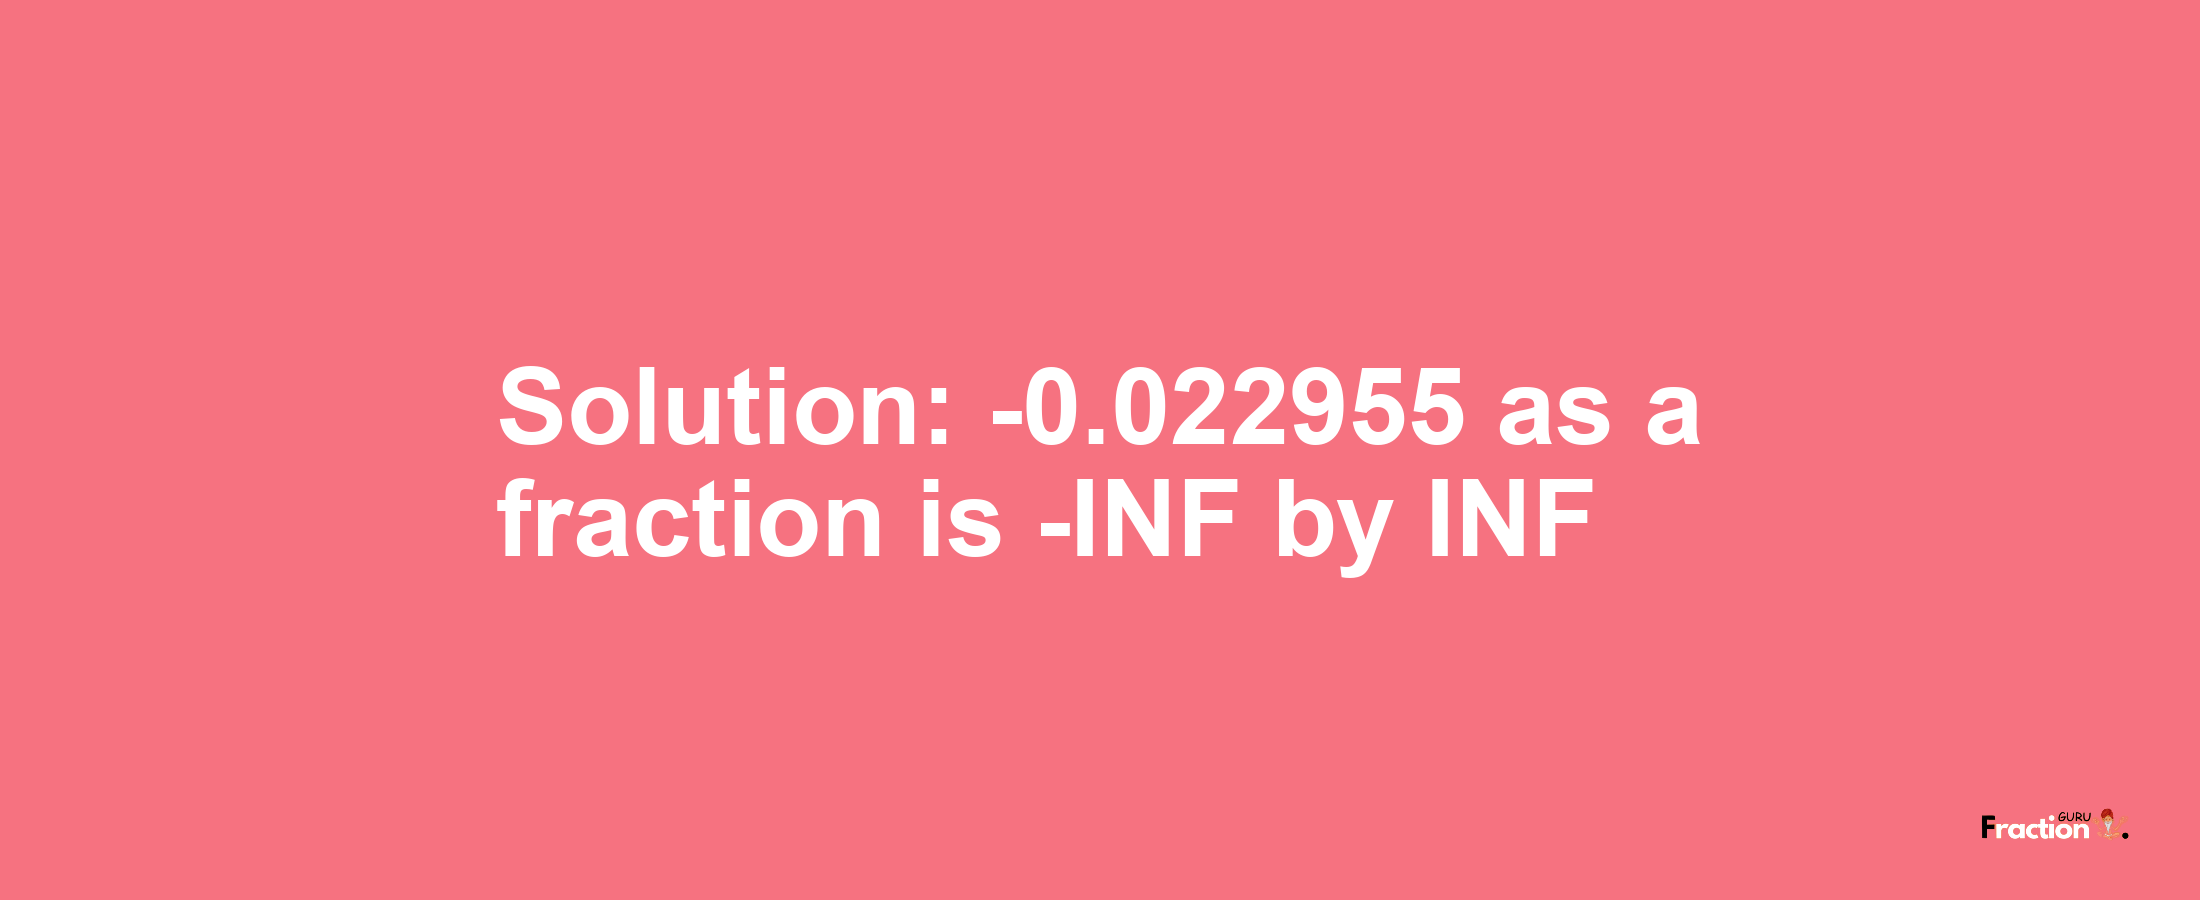 Solution:-0.022955 as a fraction is -INF/INF